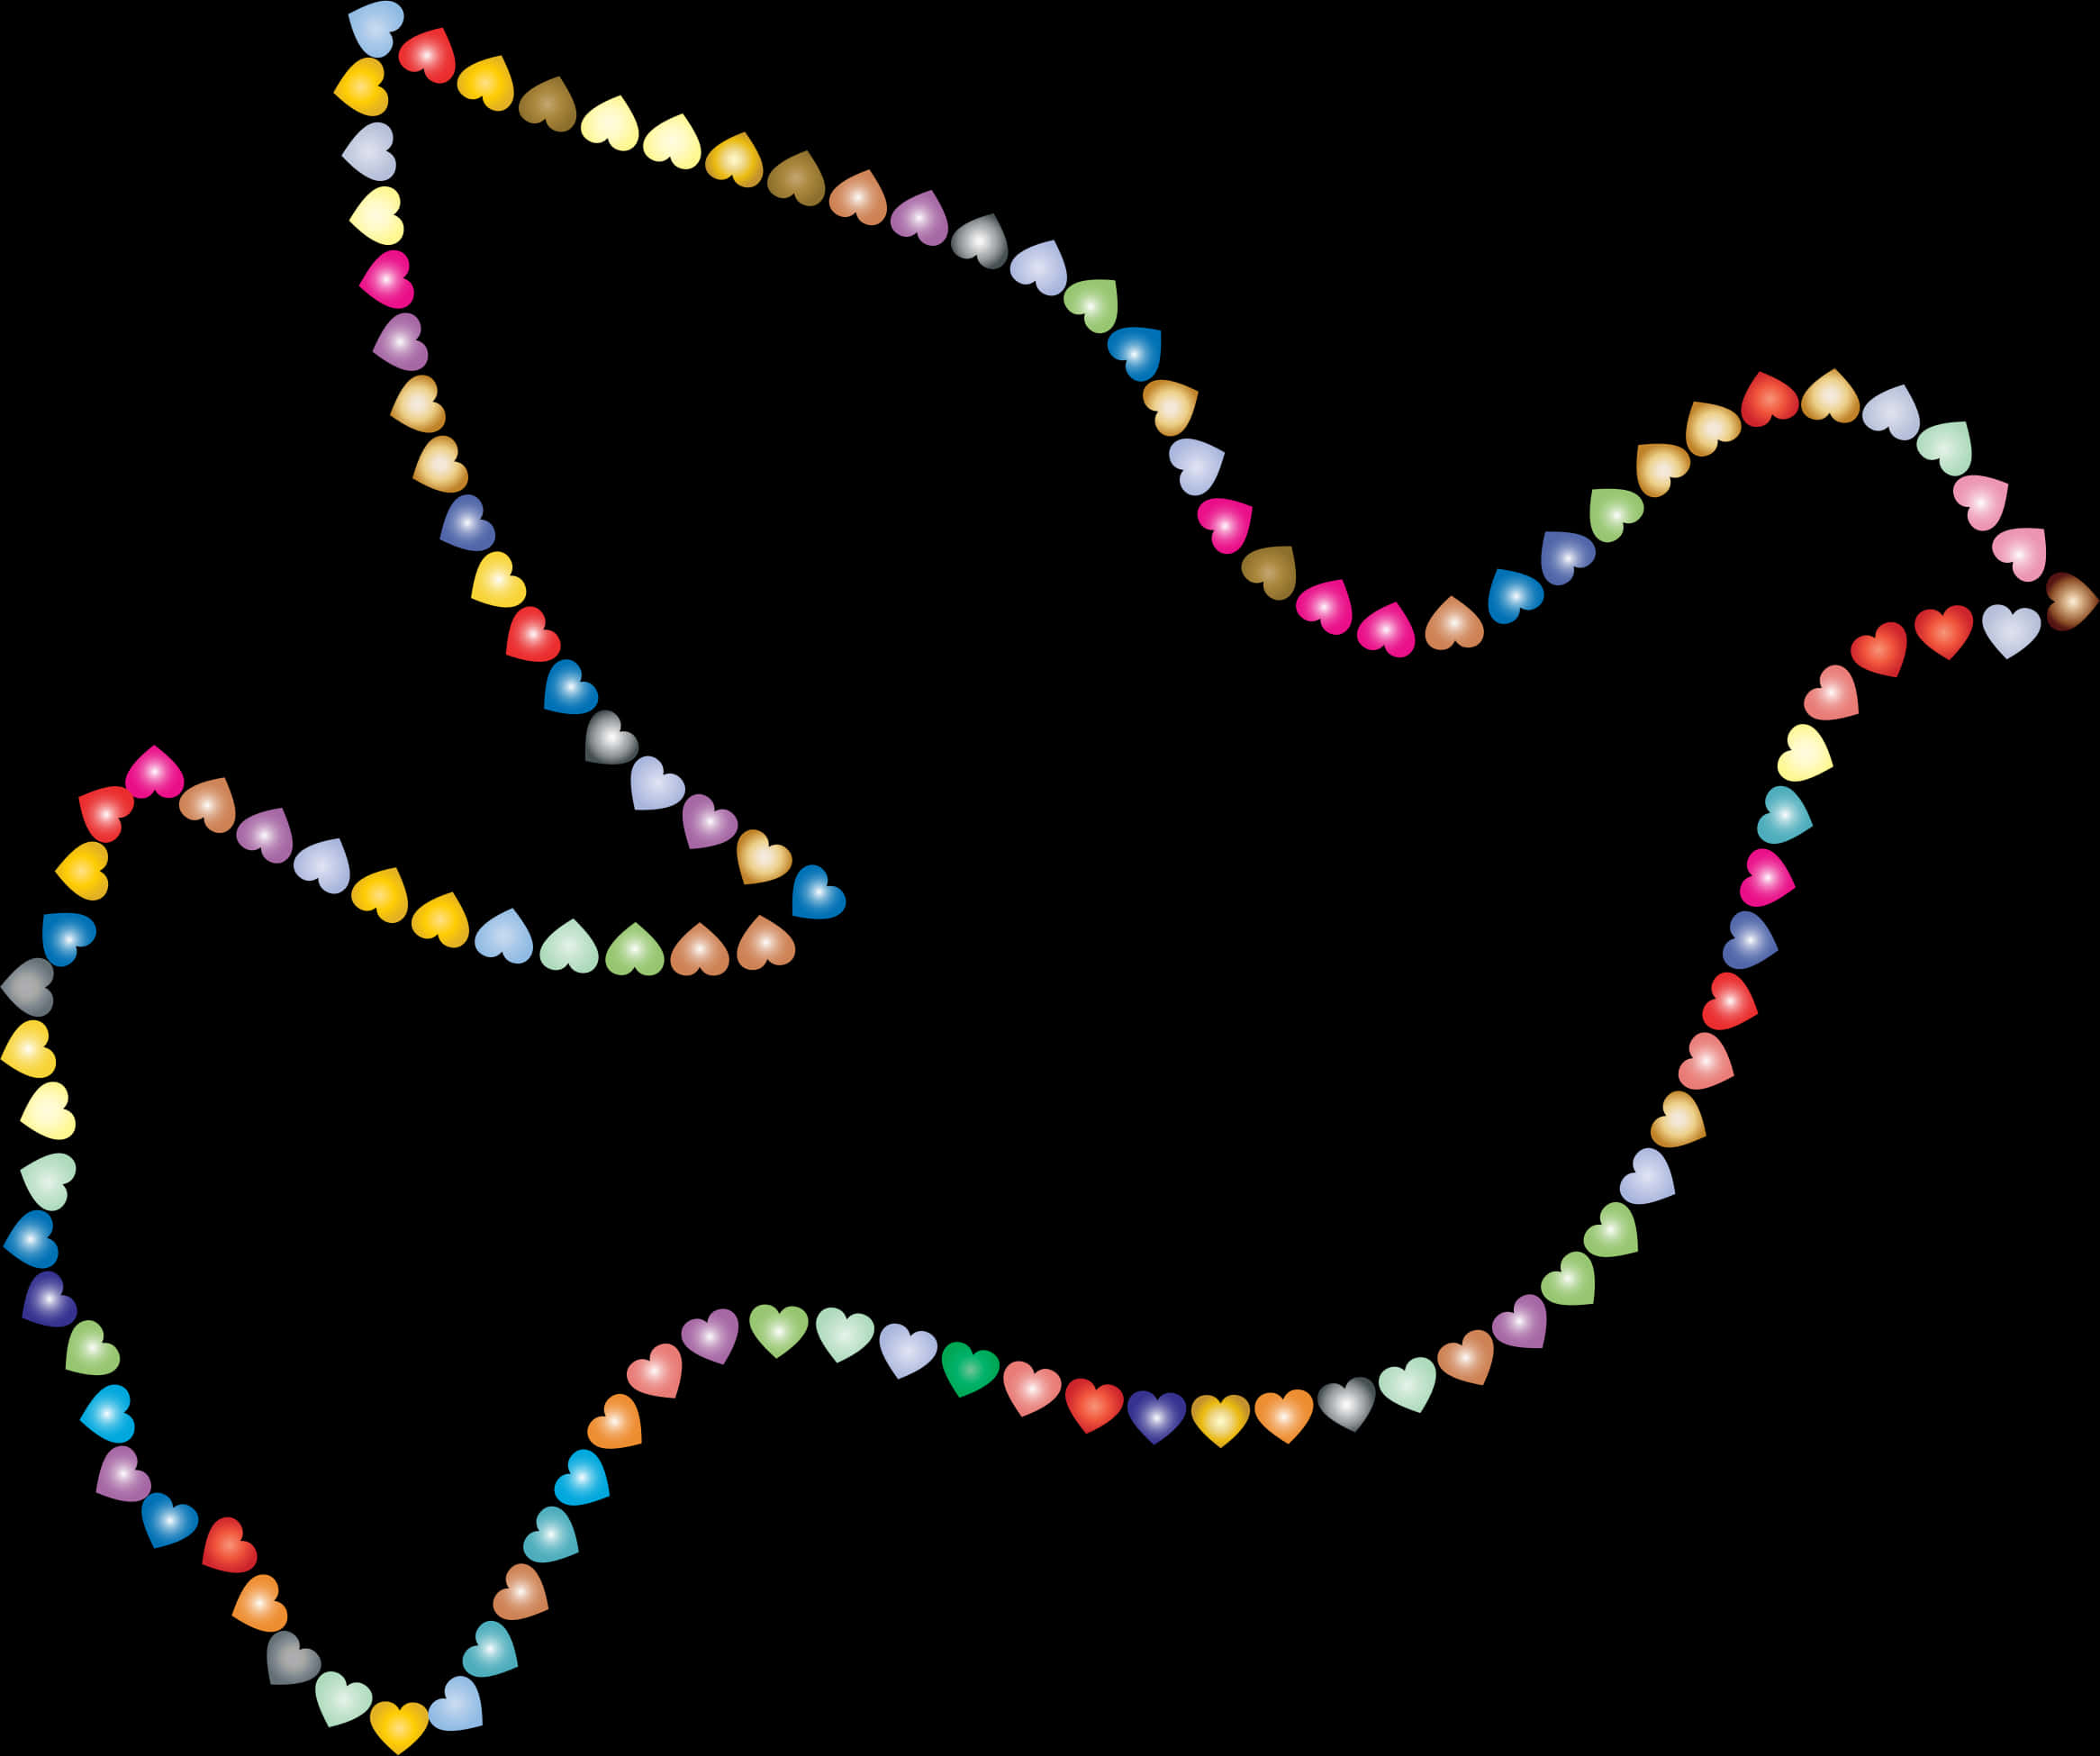 Colorful Hearts Dove Silhouette PNG image